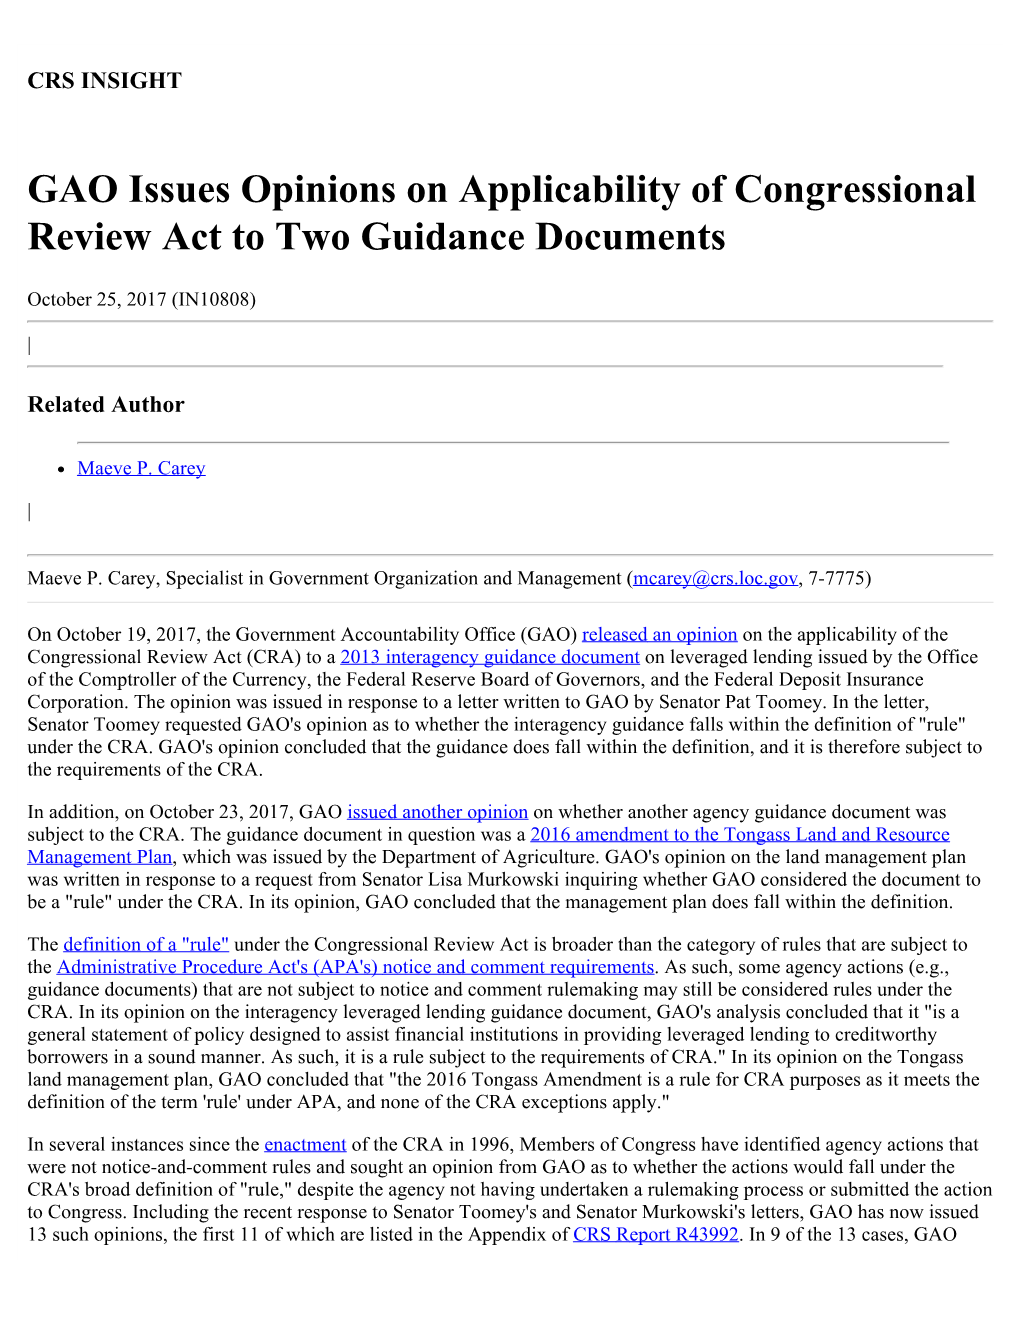 GAO Issues Opinions on Applicability of Congressional Review Act to Two Guidance Documents